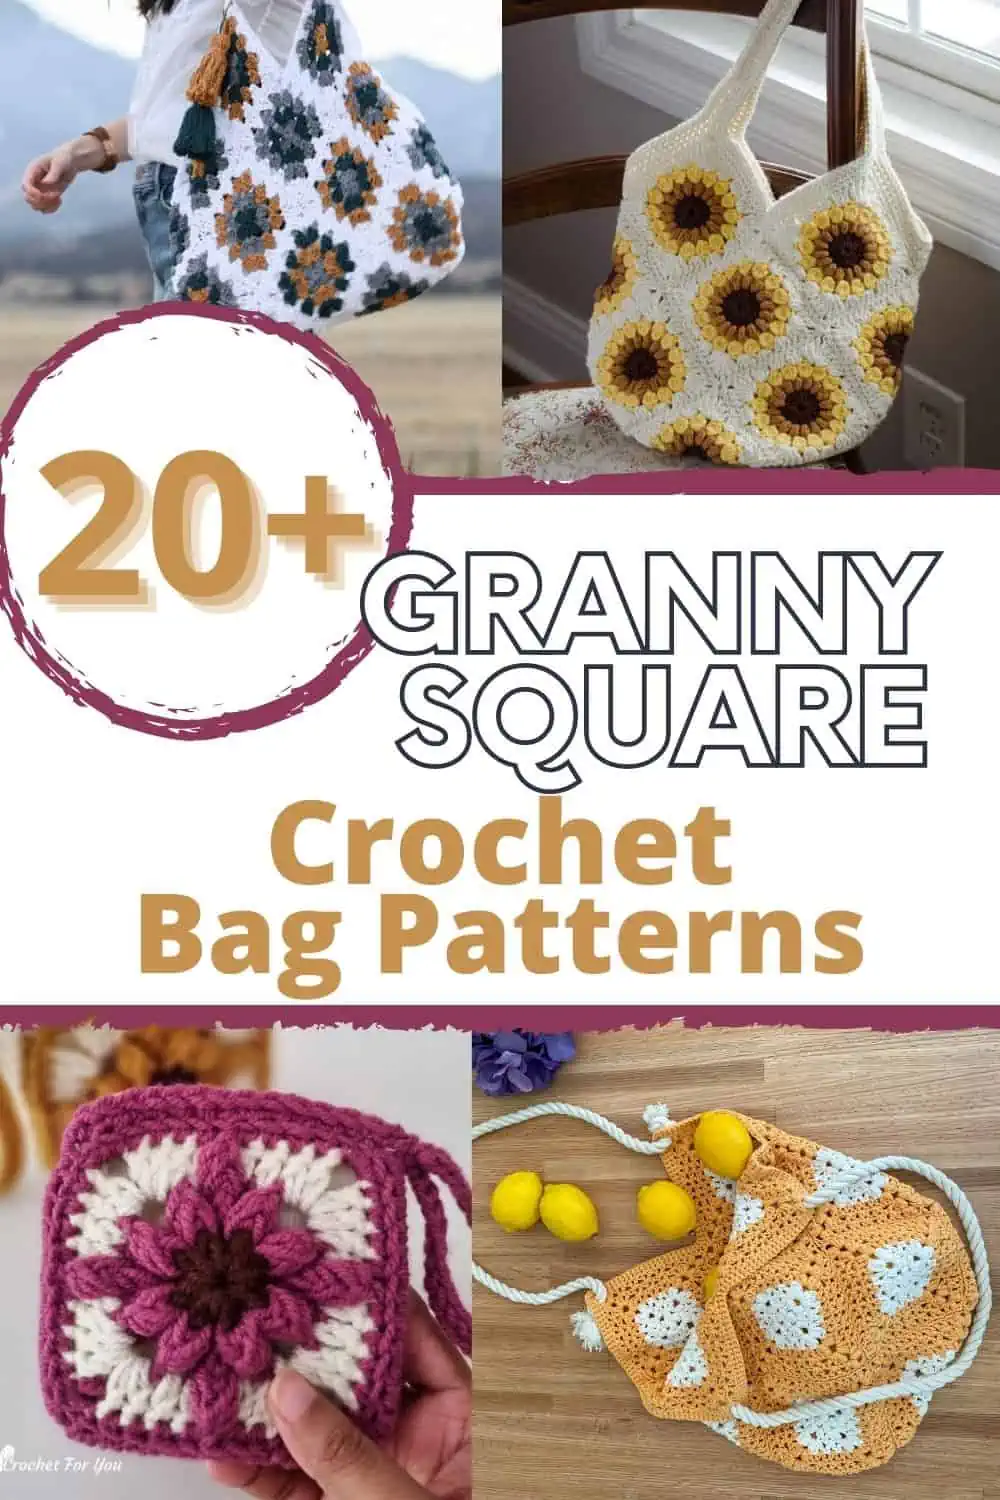 collage of different crochet granny square bags with text overlay reading "20+ Granny Square crochet bag patterns"